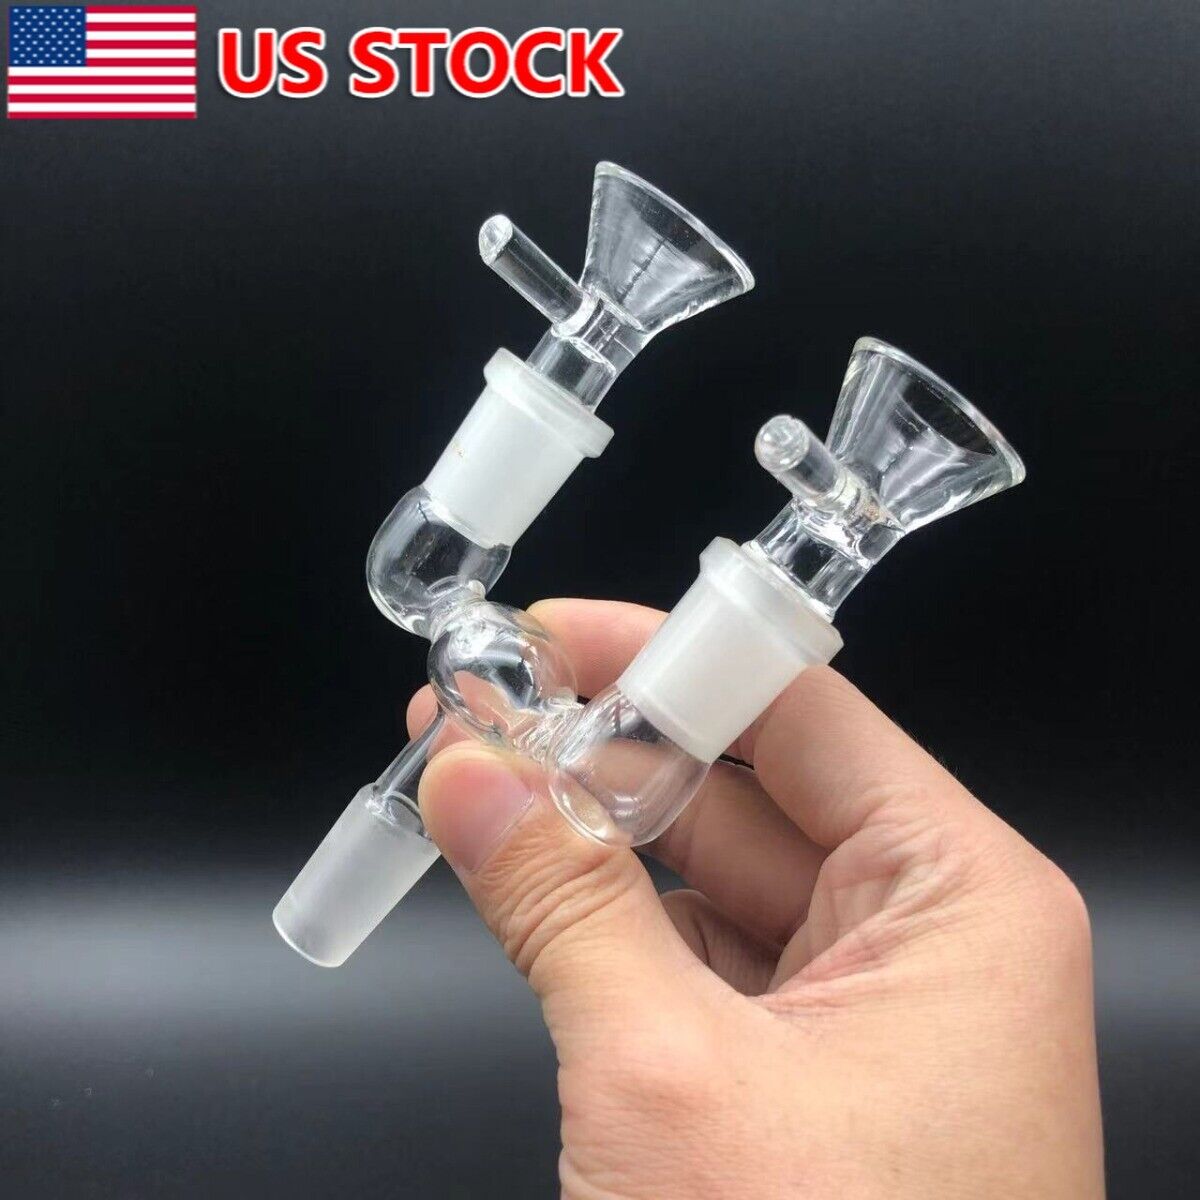 3Pcs/Set Smoking Water Pipe 14mm Double Female Join Converter + Male slide US